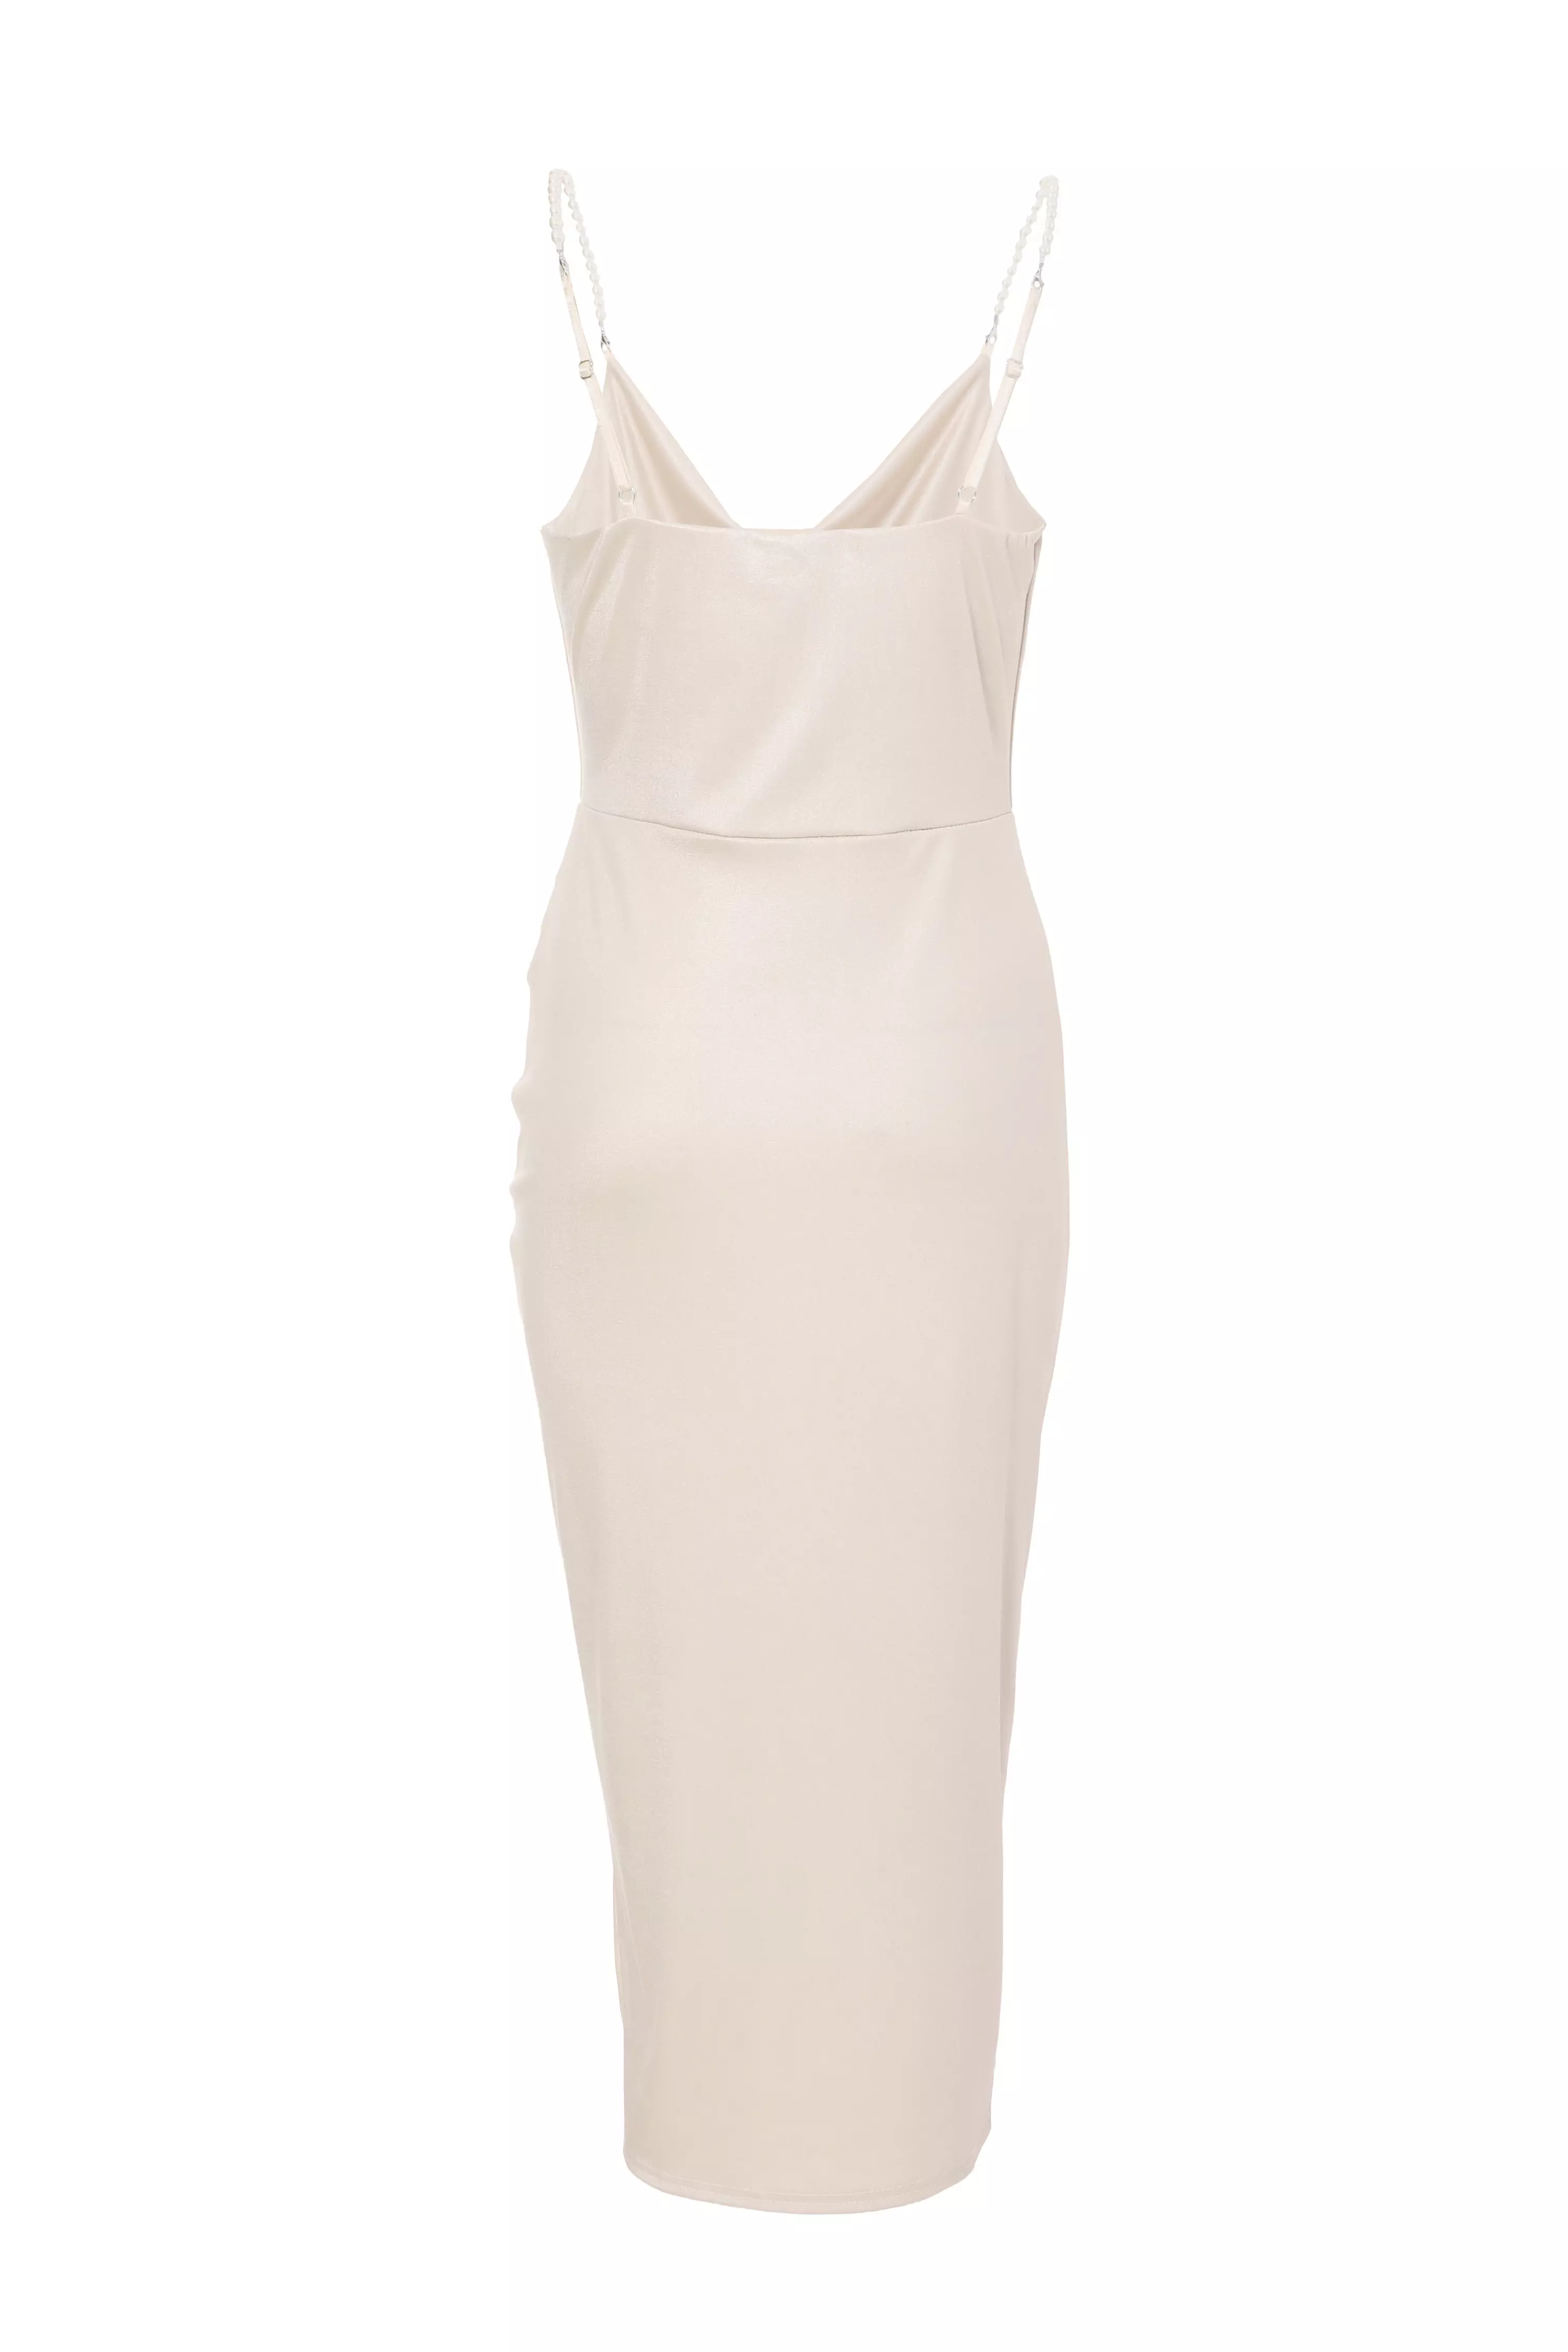 Champagne Shimmer Cowl Ruched Midi Dress - QUIZ Clothing